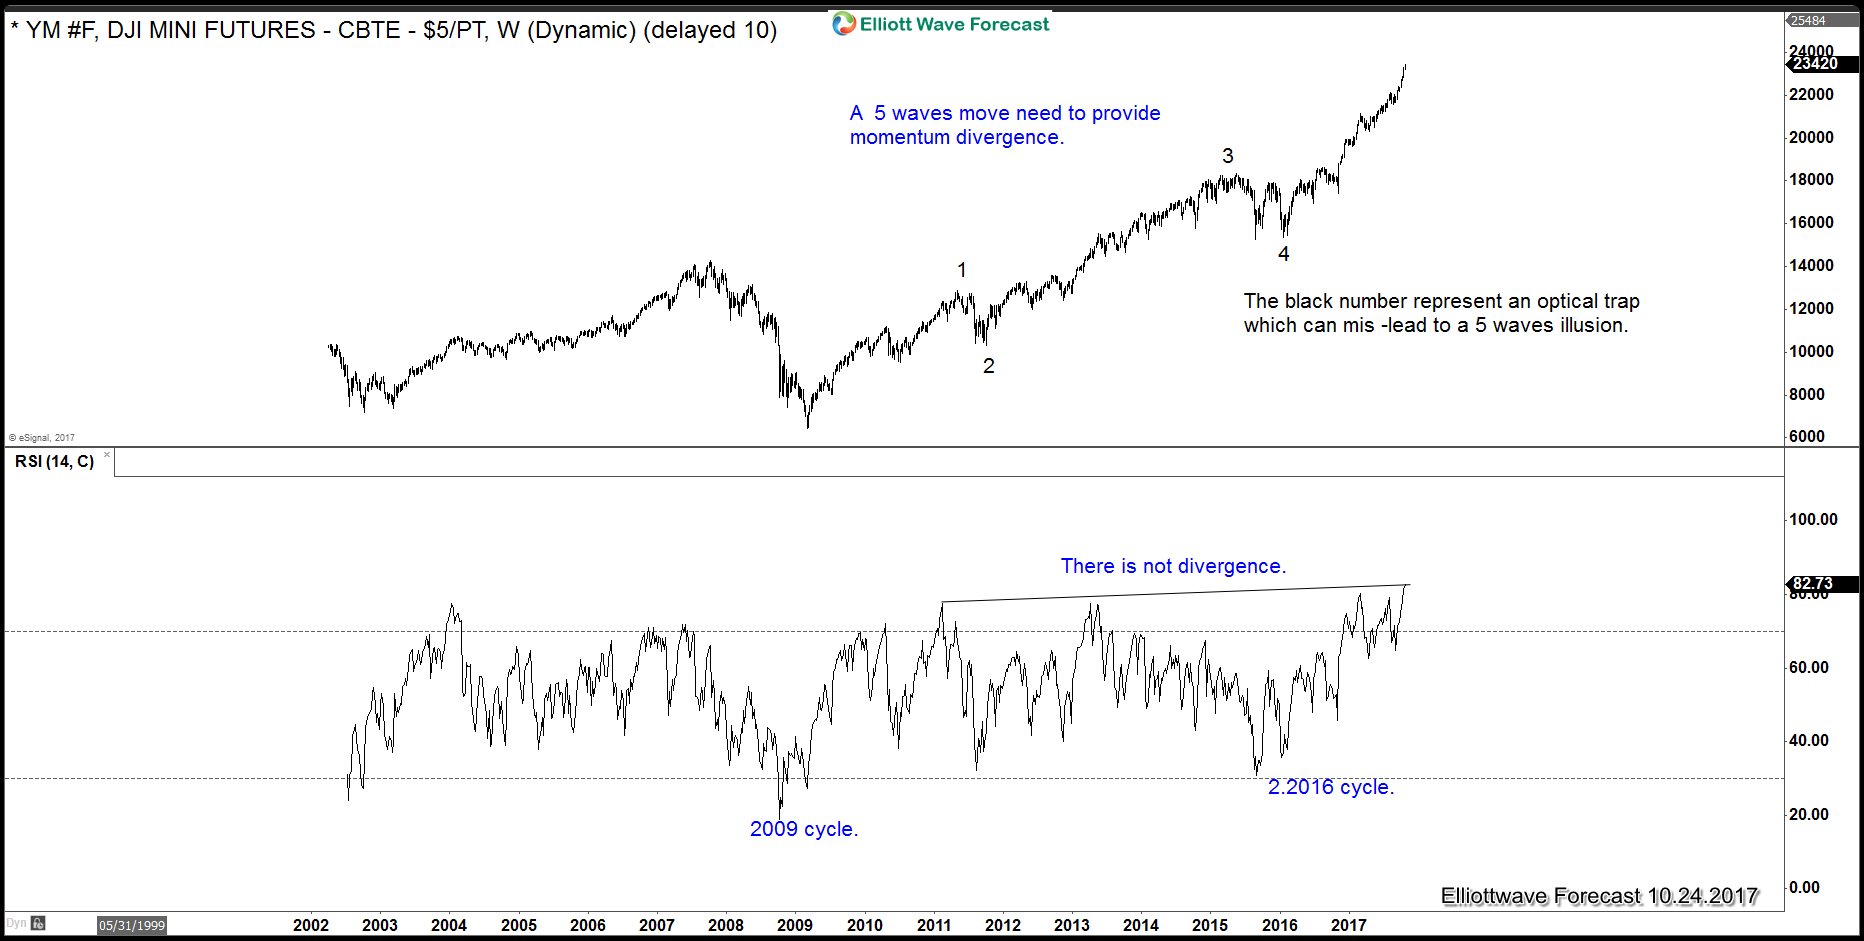 YM#F Cycles From 2009 Low (Price And RSI)